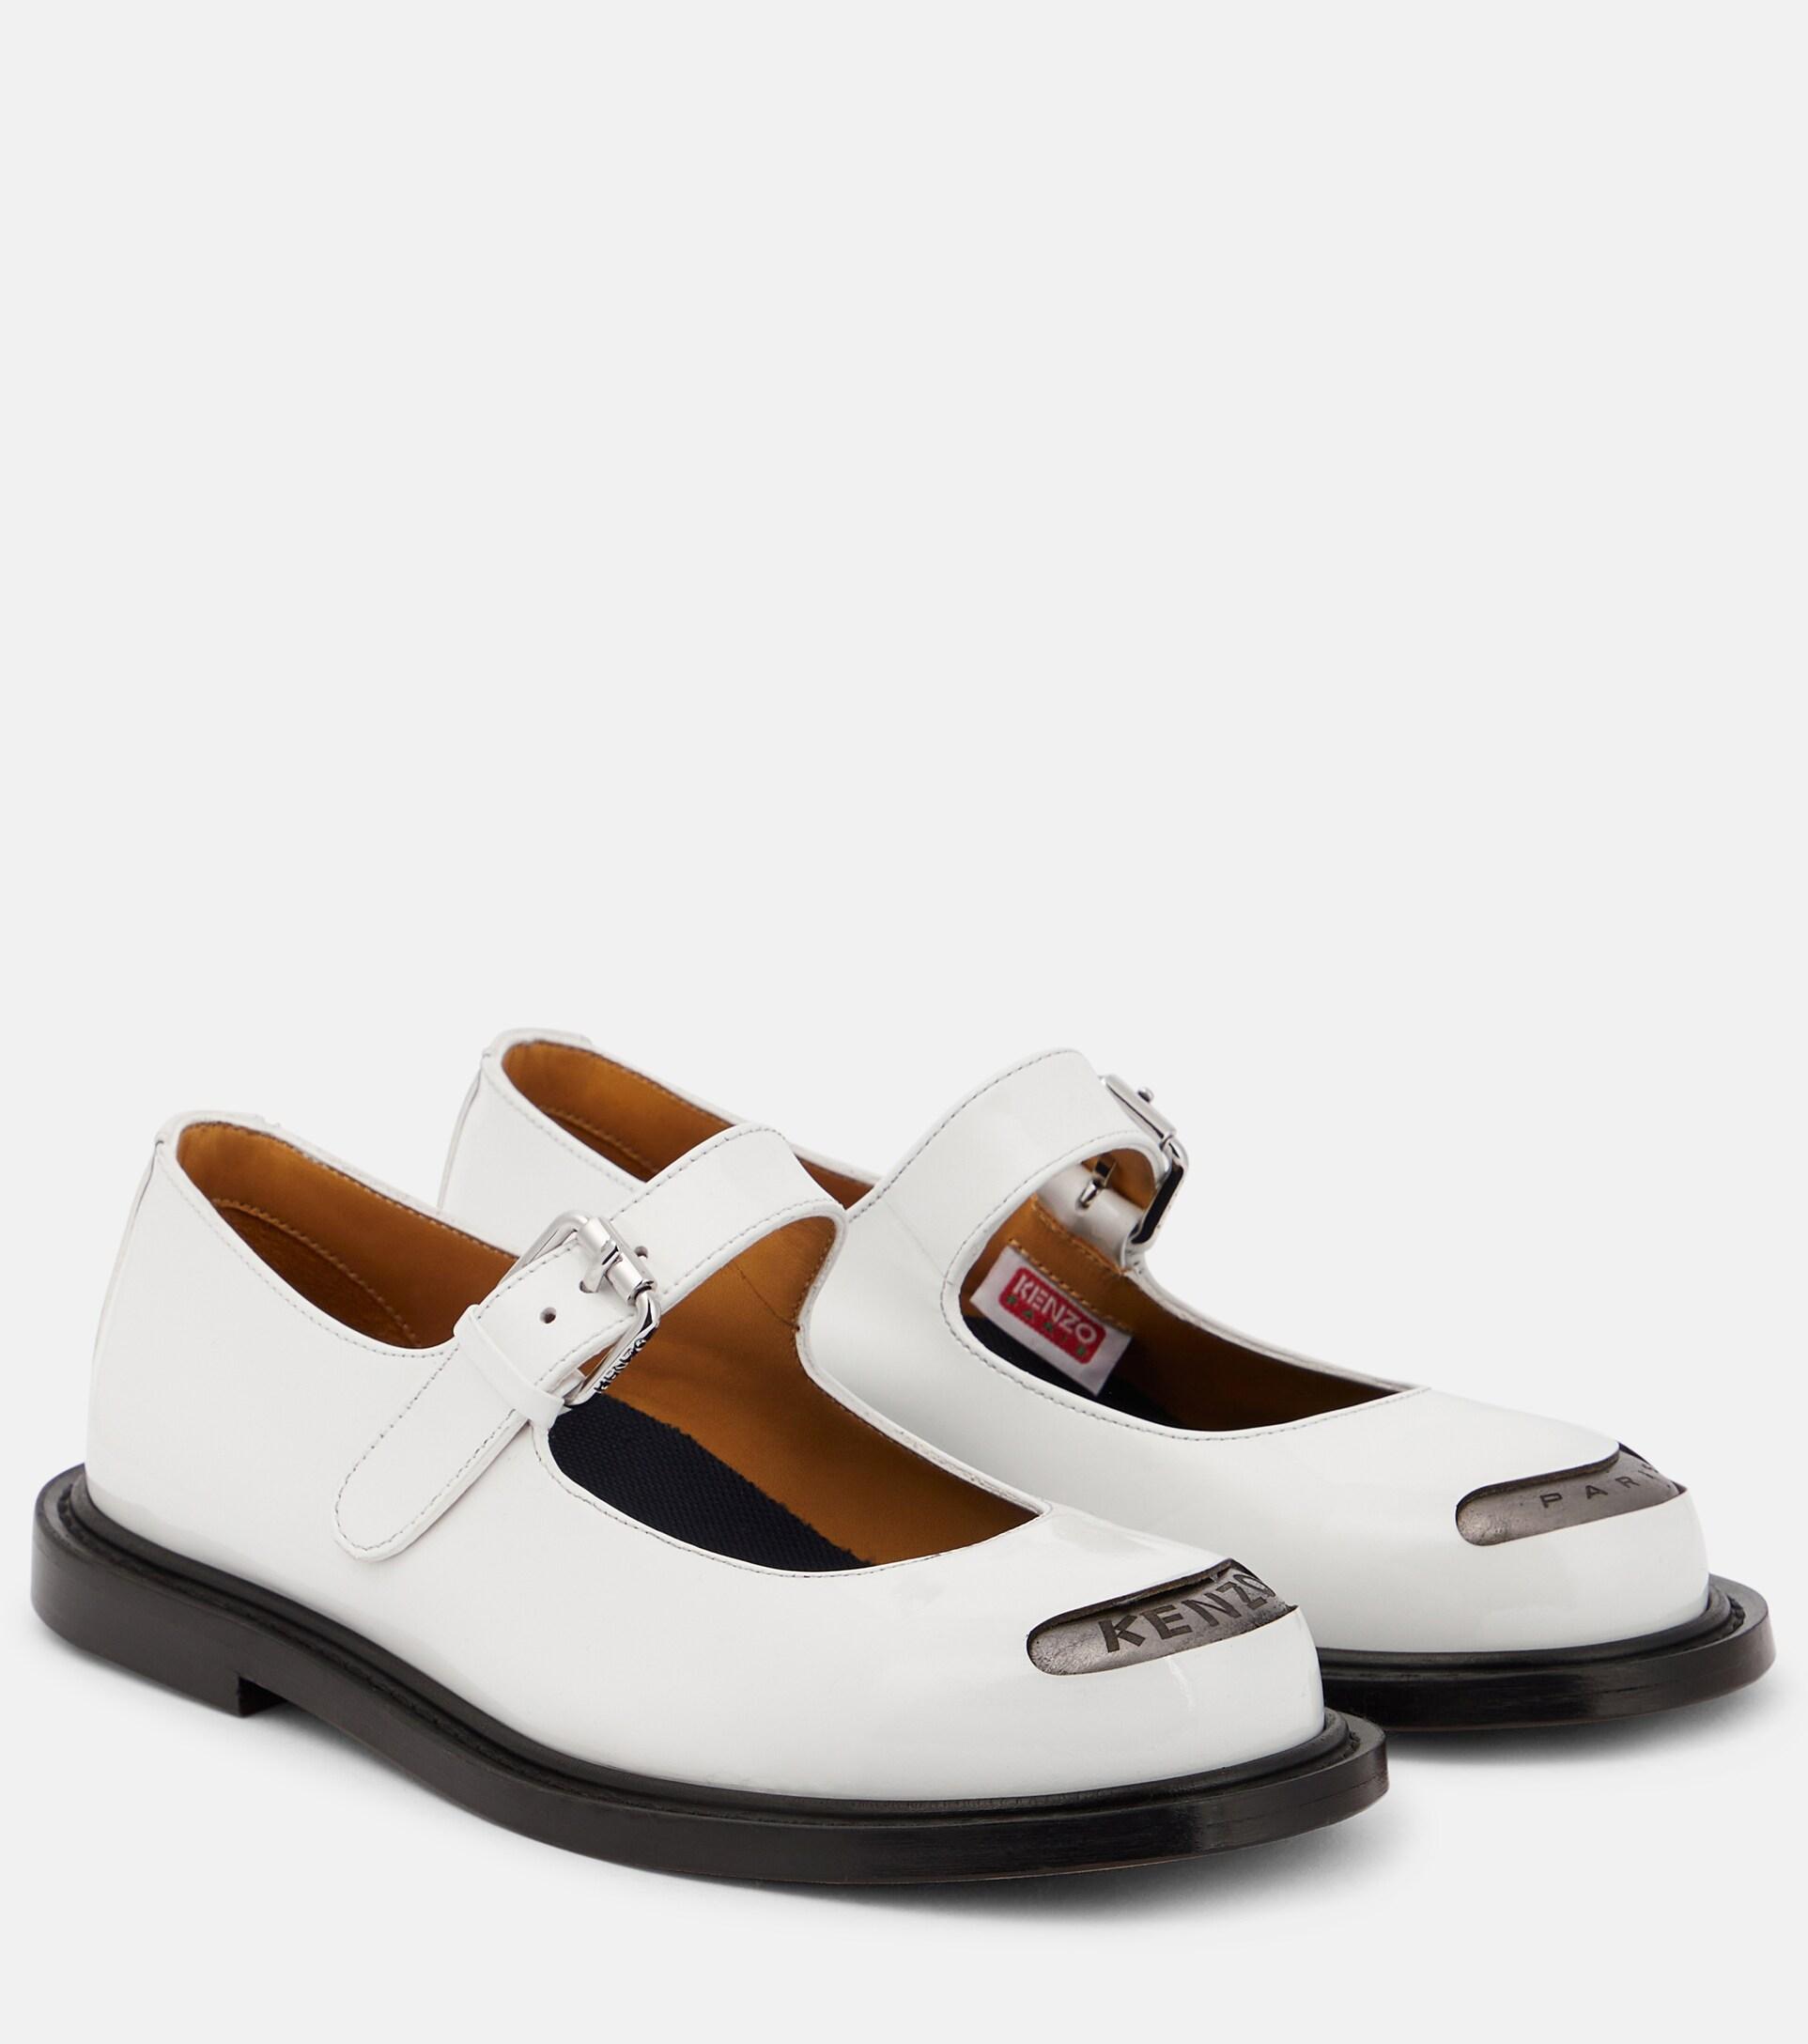 KENZO Smile Patent Leather Mary Jane Flats in White | Lyst